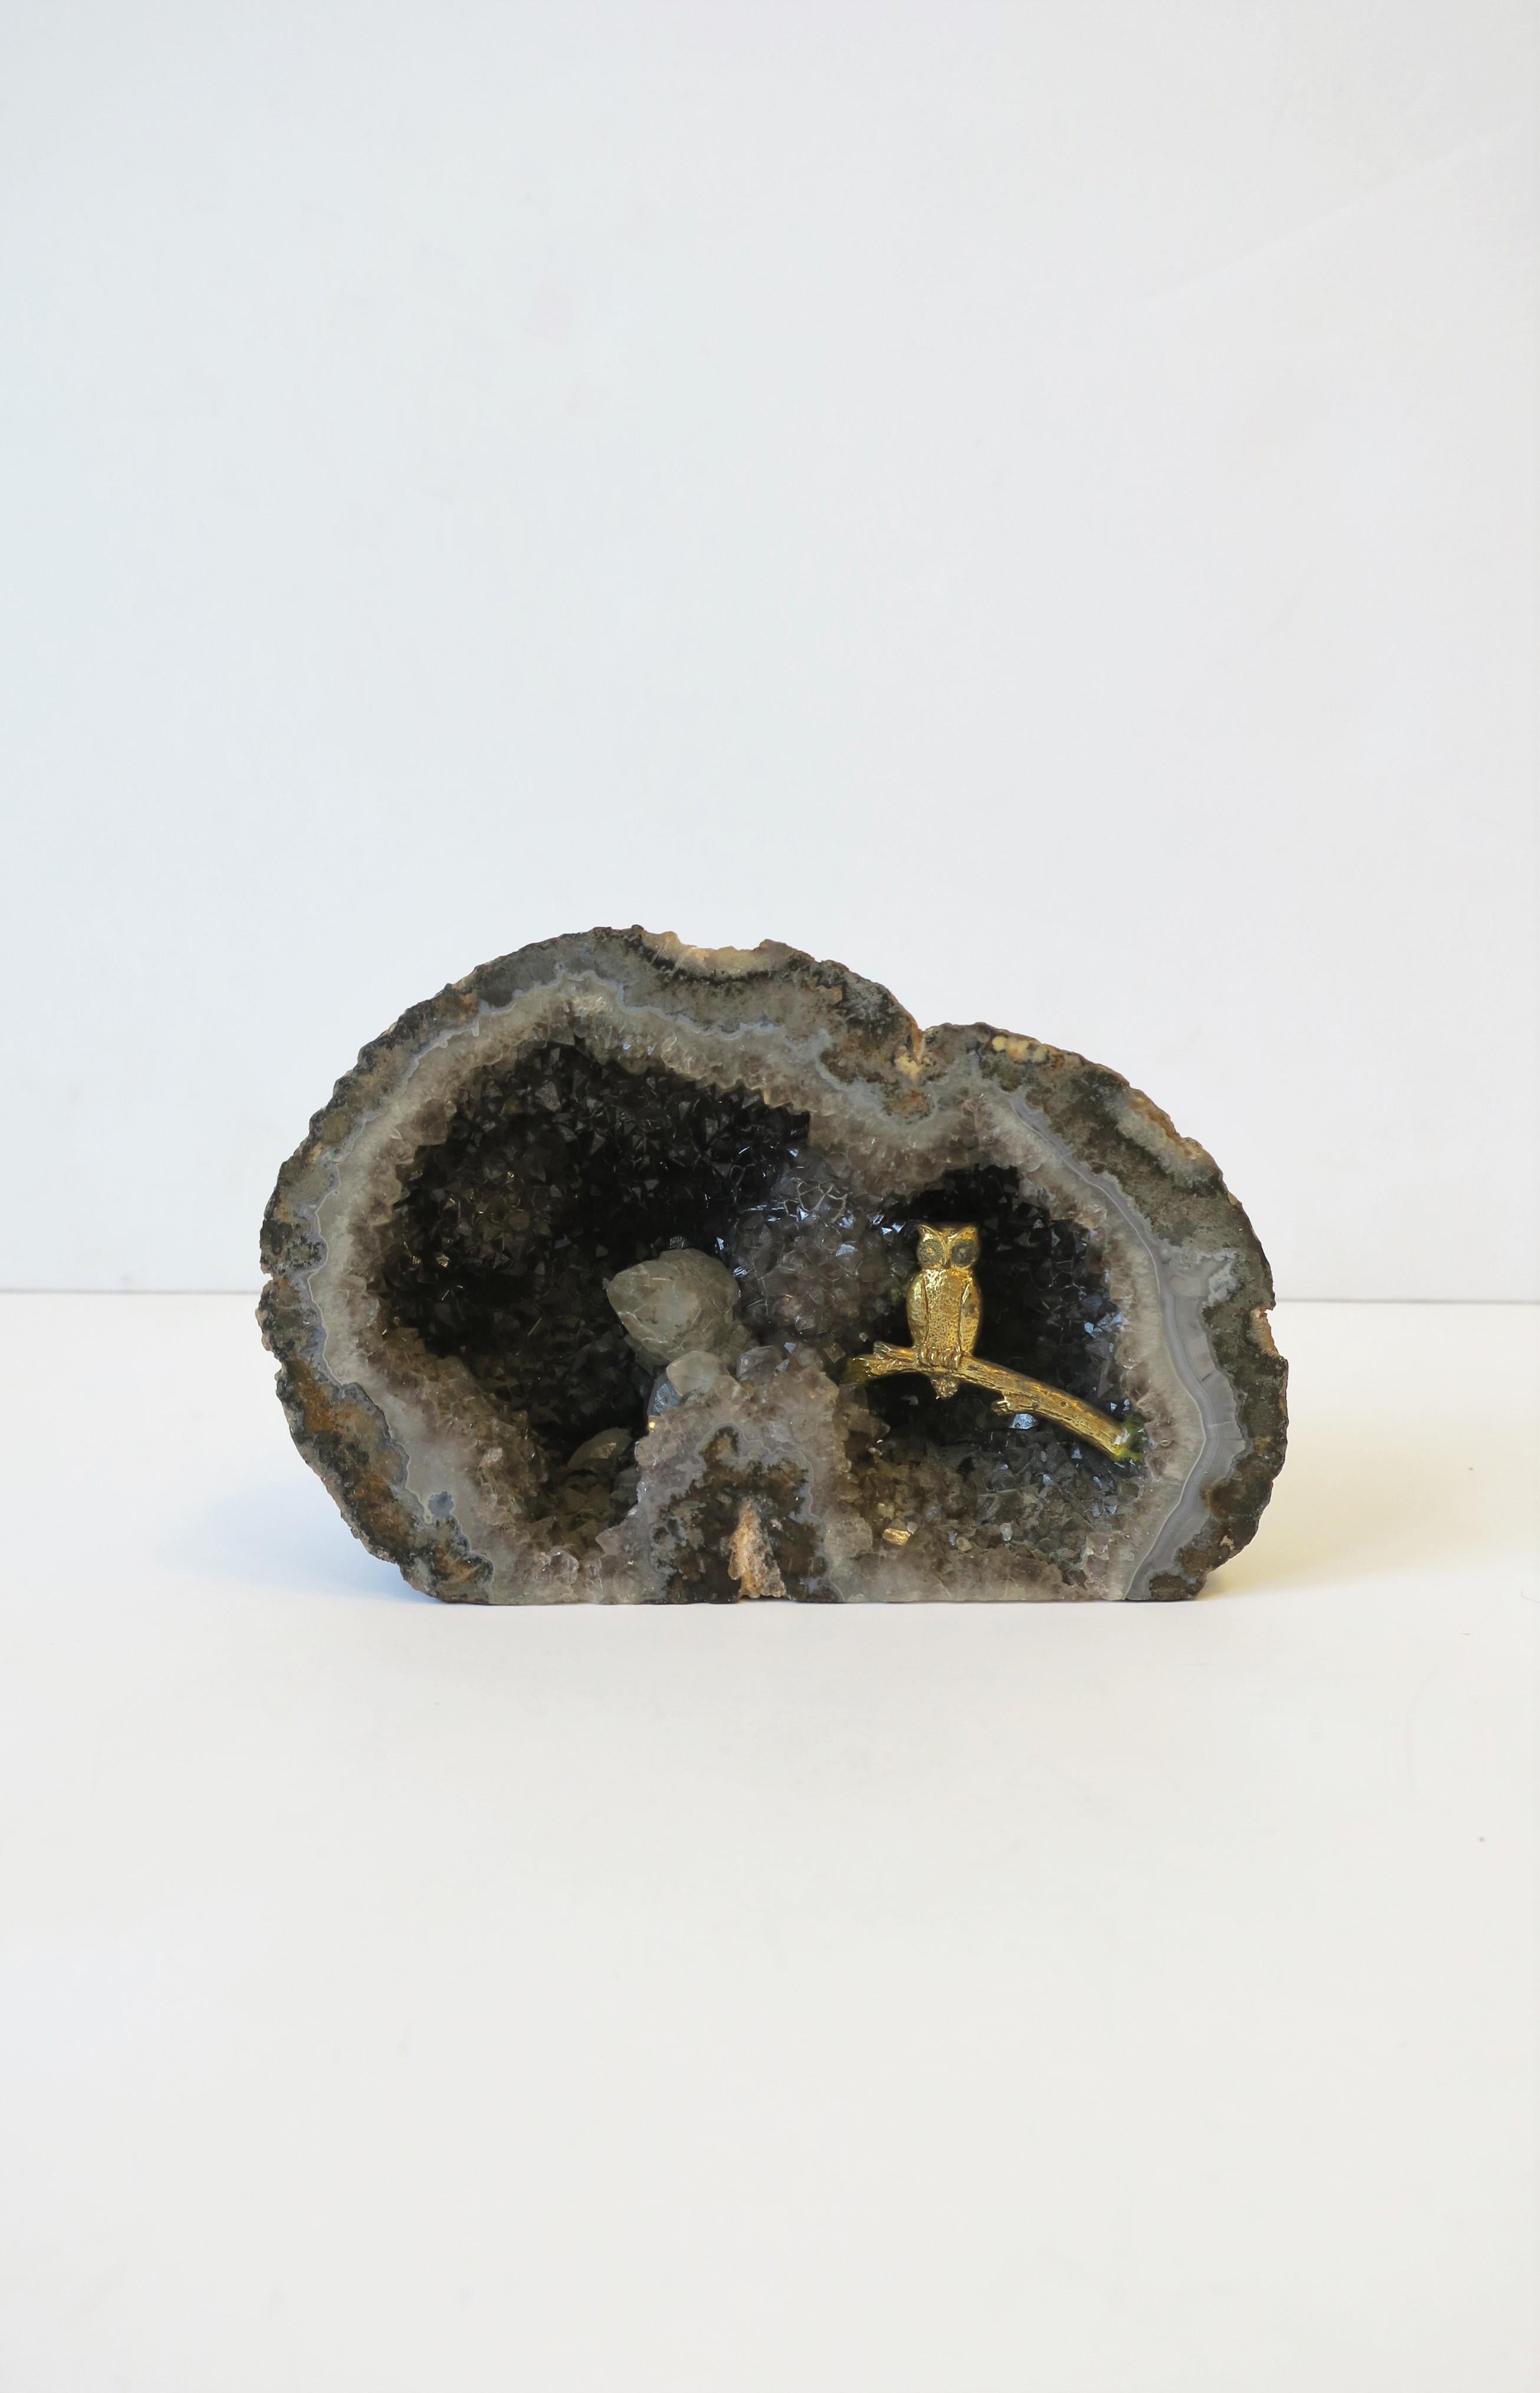 A beautiful and substantial grey/gray agate crystal geode with perched brass owl bird on branch. Natural beautiful shades of grey make up this decorative object. Piece can work well on/in a shelf, credenza, office, library, etc. Dimensions: 3.63